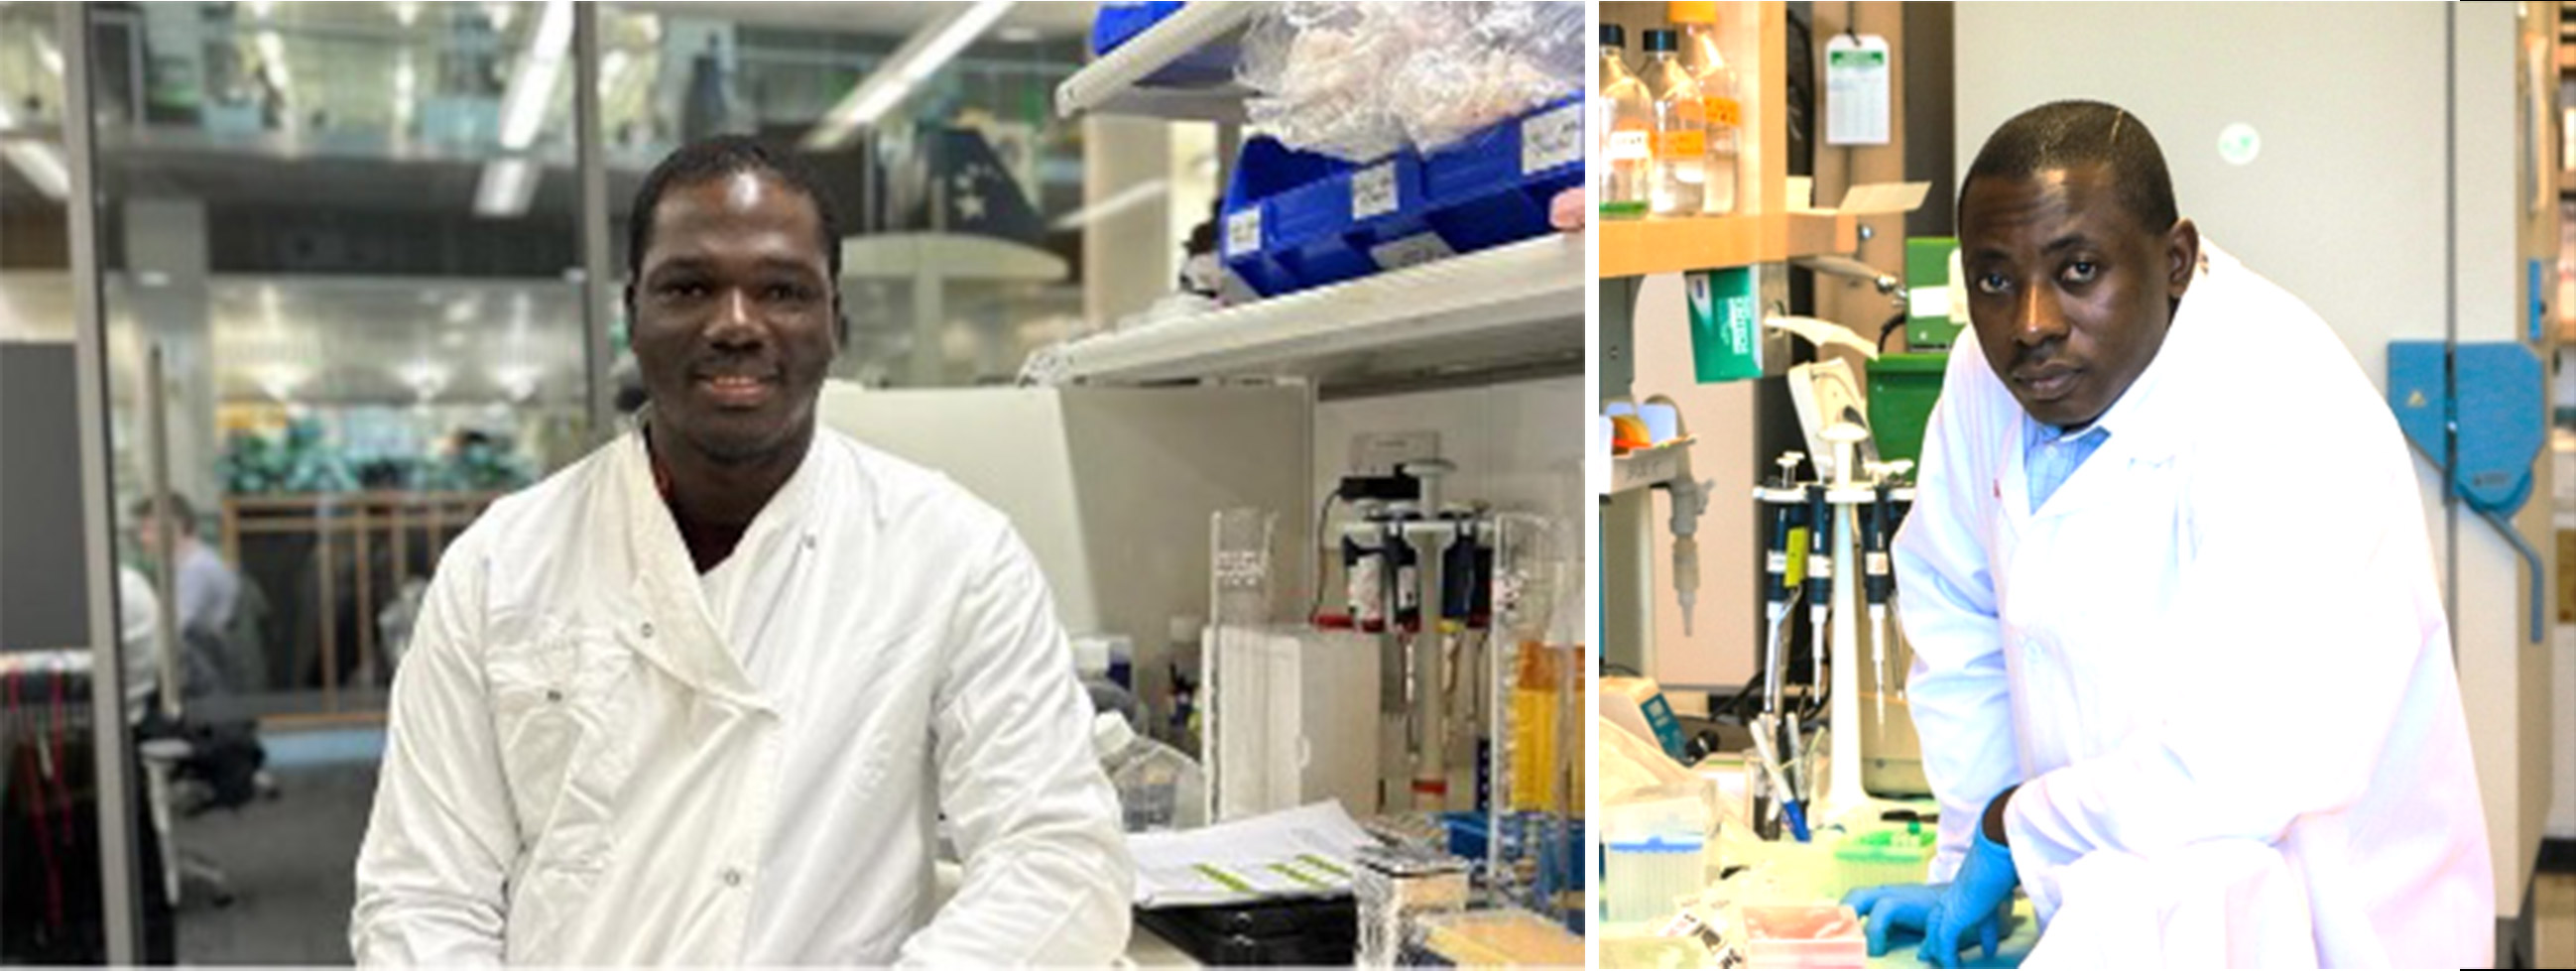 University of Ghana wins two Crick African Network Fellowships  to help promote Health in Africa